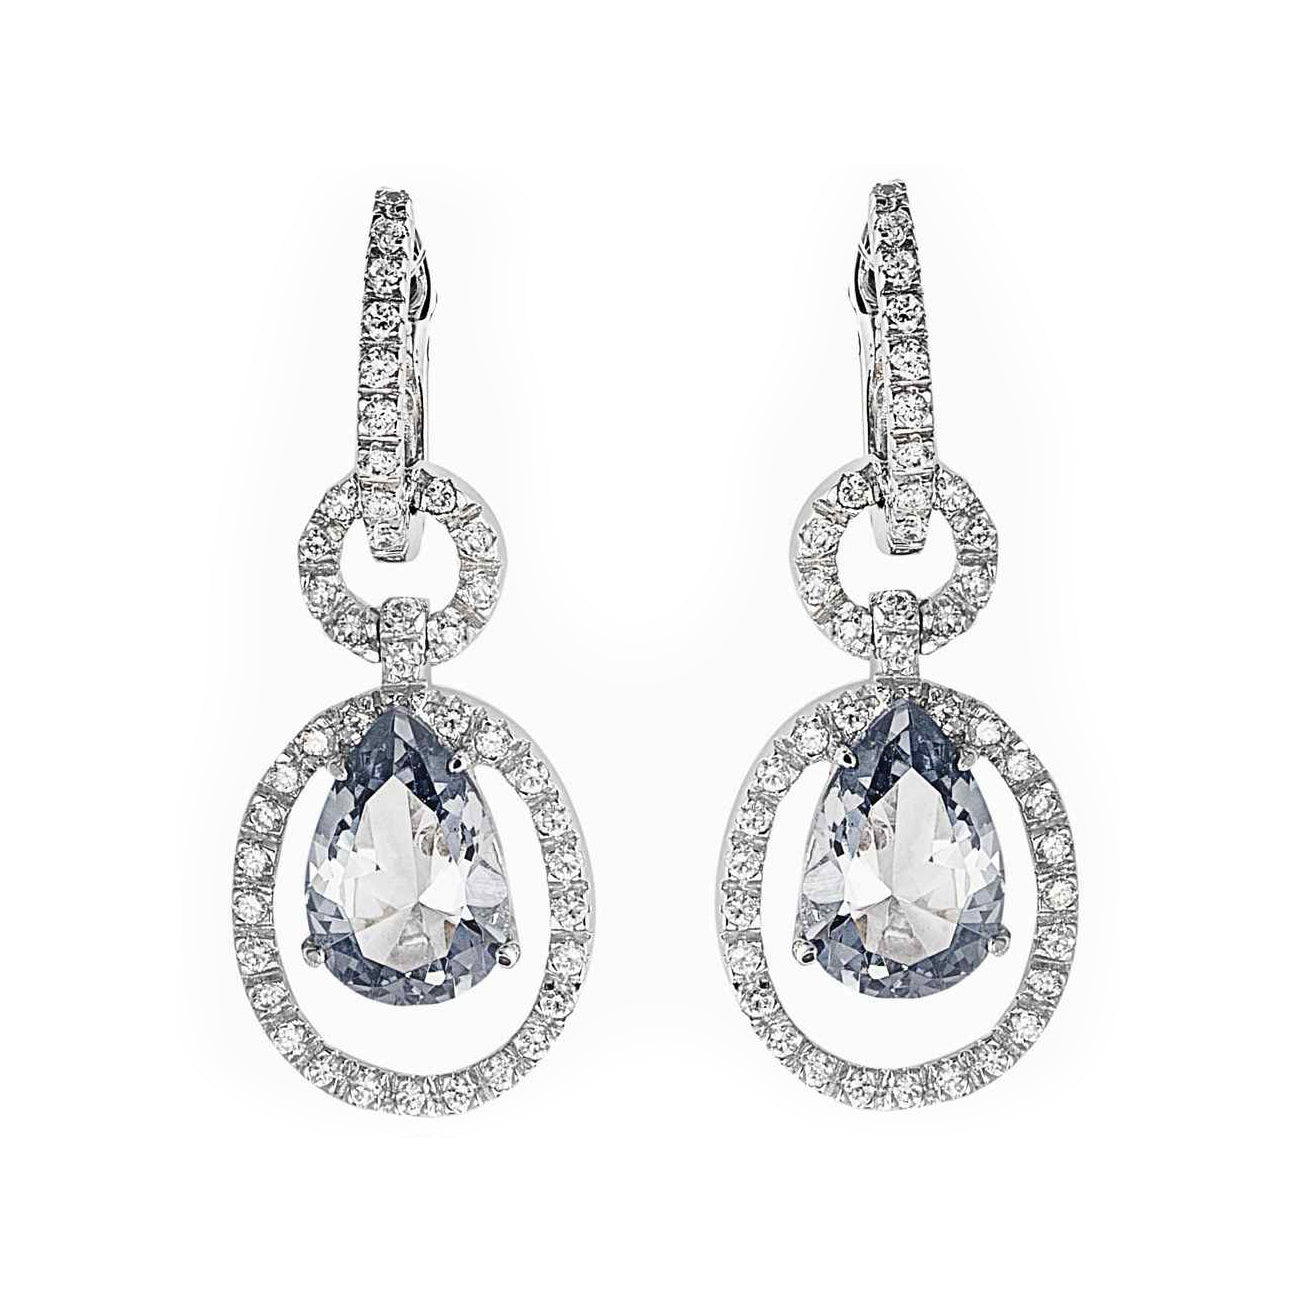 Princess Mary Earrings in 925 sterling silver with blue and clear cubic zirconia stones. Worldwide shipping. Affordable luxury jewellery by Bellagio & Co.